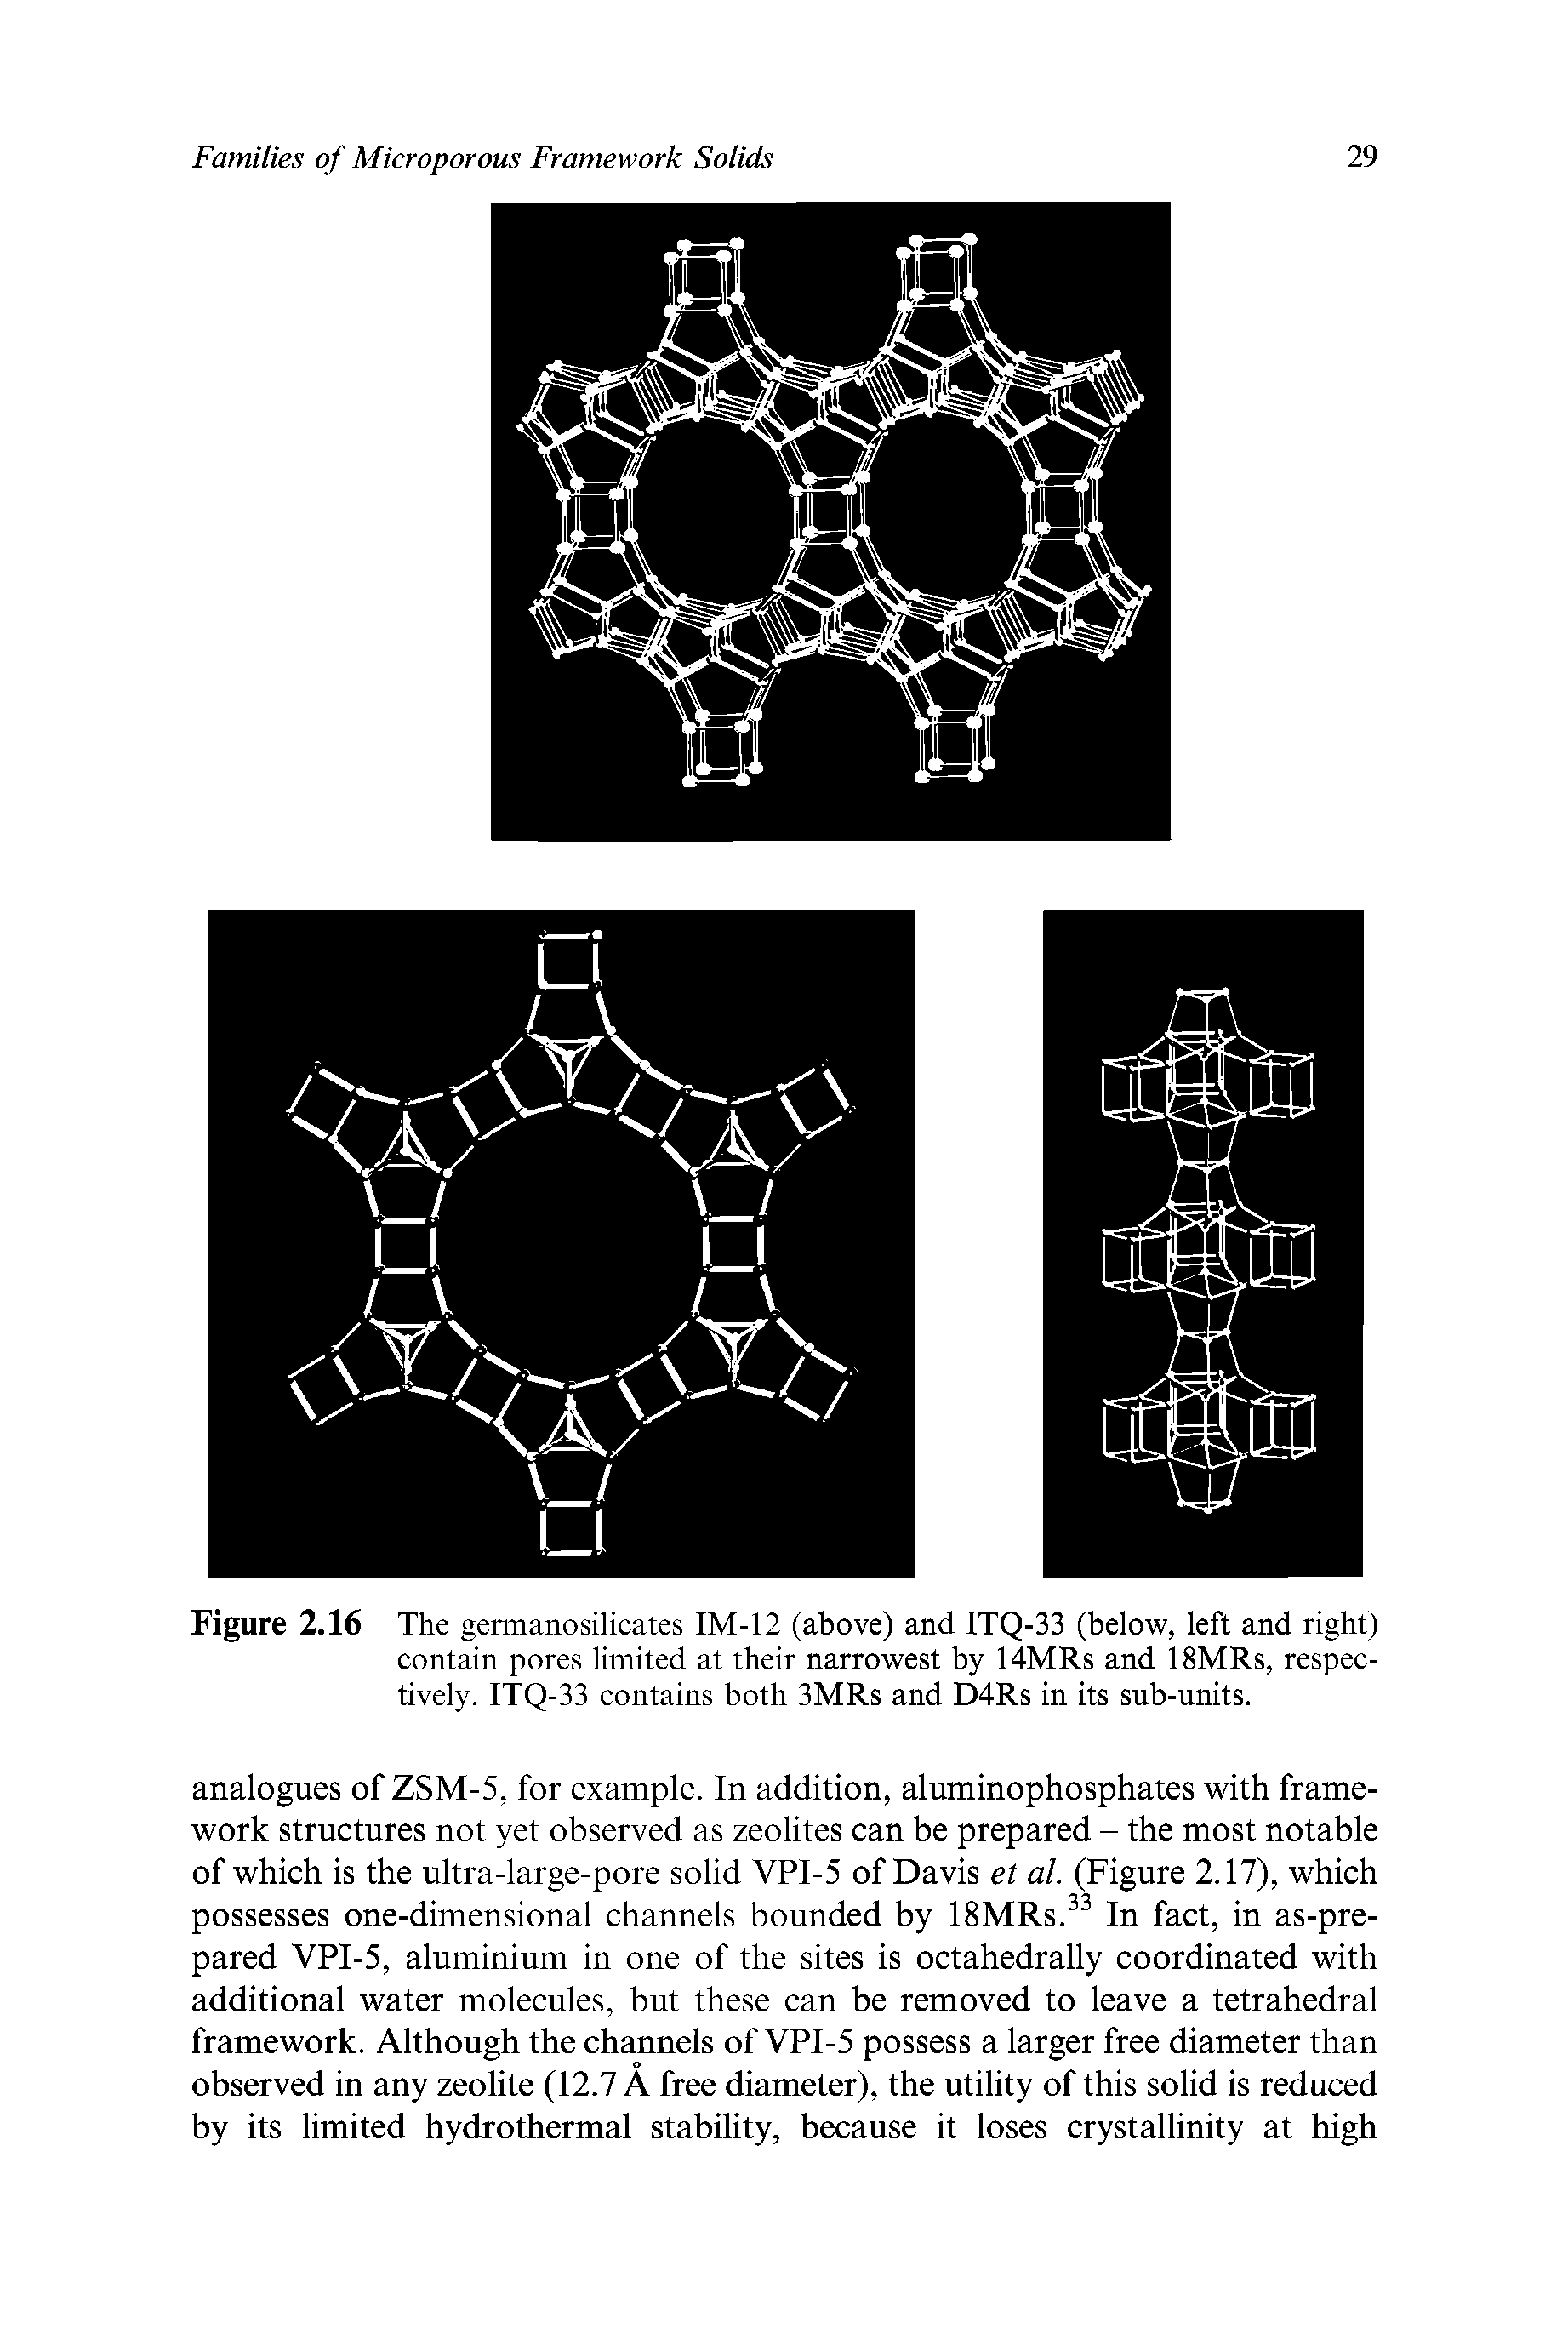 Figure 2.16 The germanosilicates IM-12 (above) and ITQ-33 (below, left and right) contain pores limited at their narrowest by 14MRs and 18MRs, respectively. ITQ-33 contains both 3MRs and D4Rs in its sub-units.